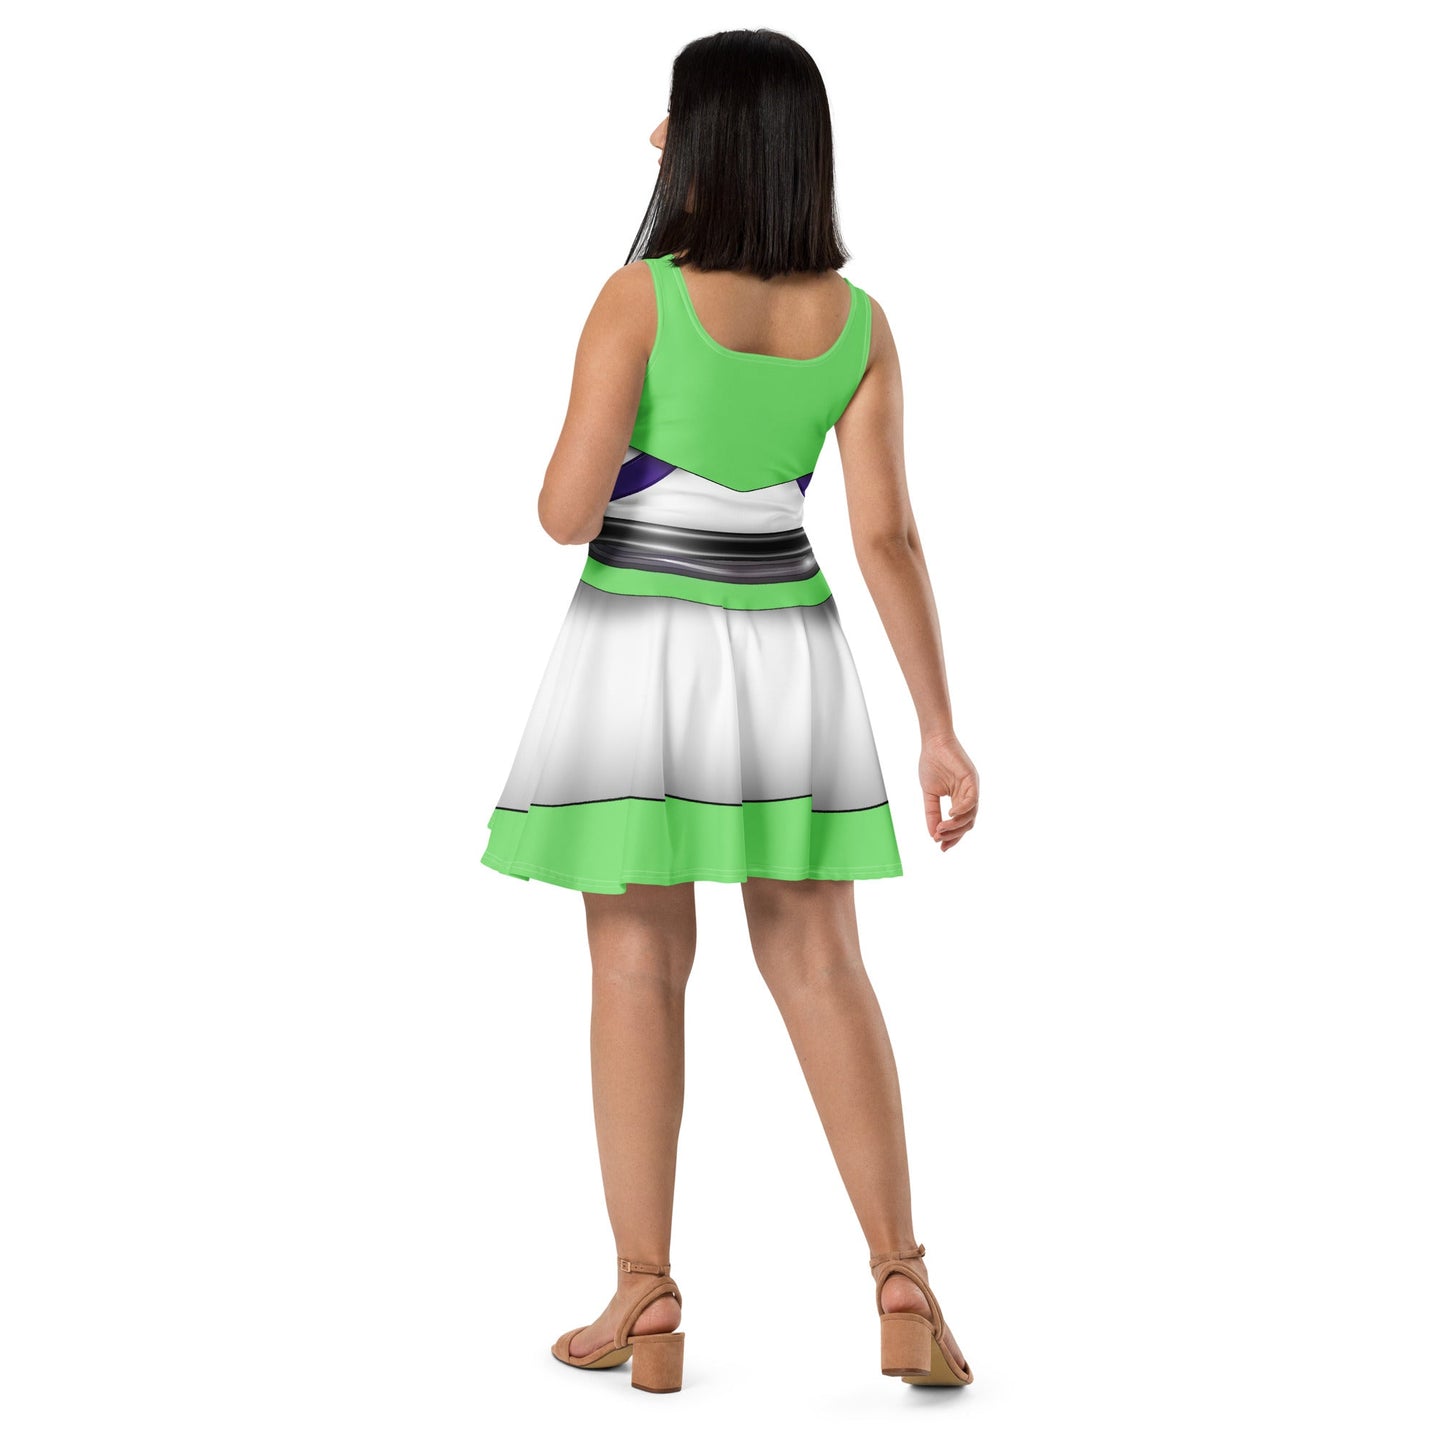 The Buzz Skater Dress- Cosplay, Bounding, Running Costume adult disneybuzz dressbuzz lightyear#tag4##tag5##tag6#